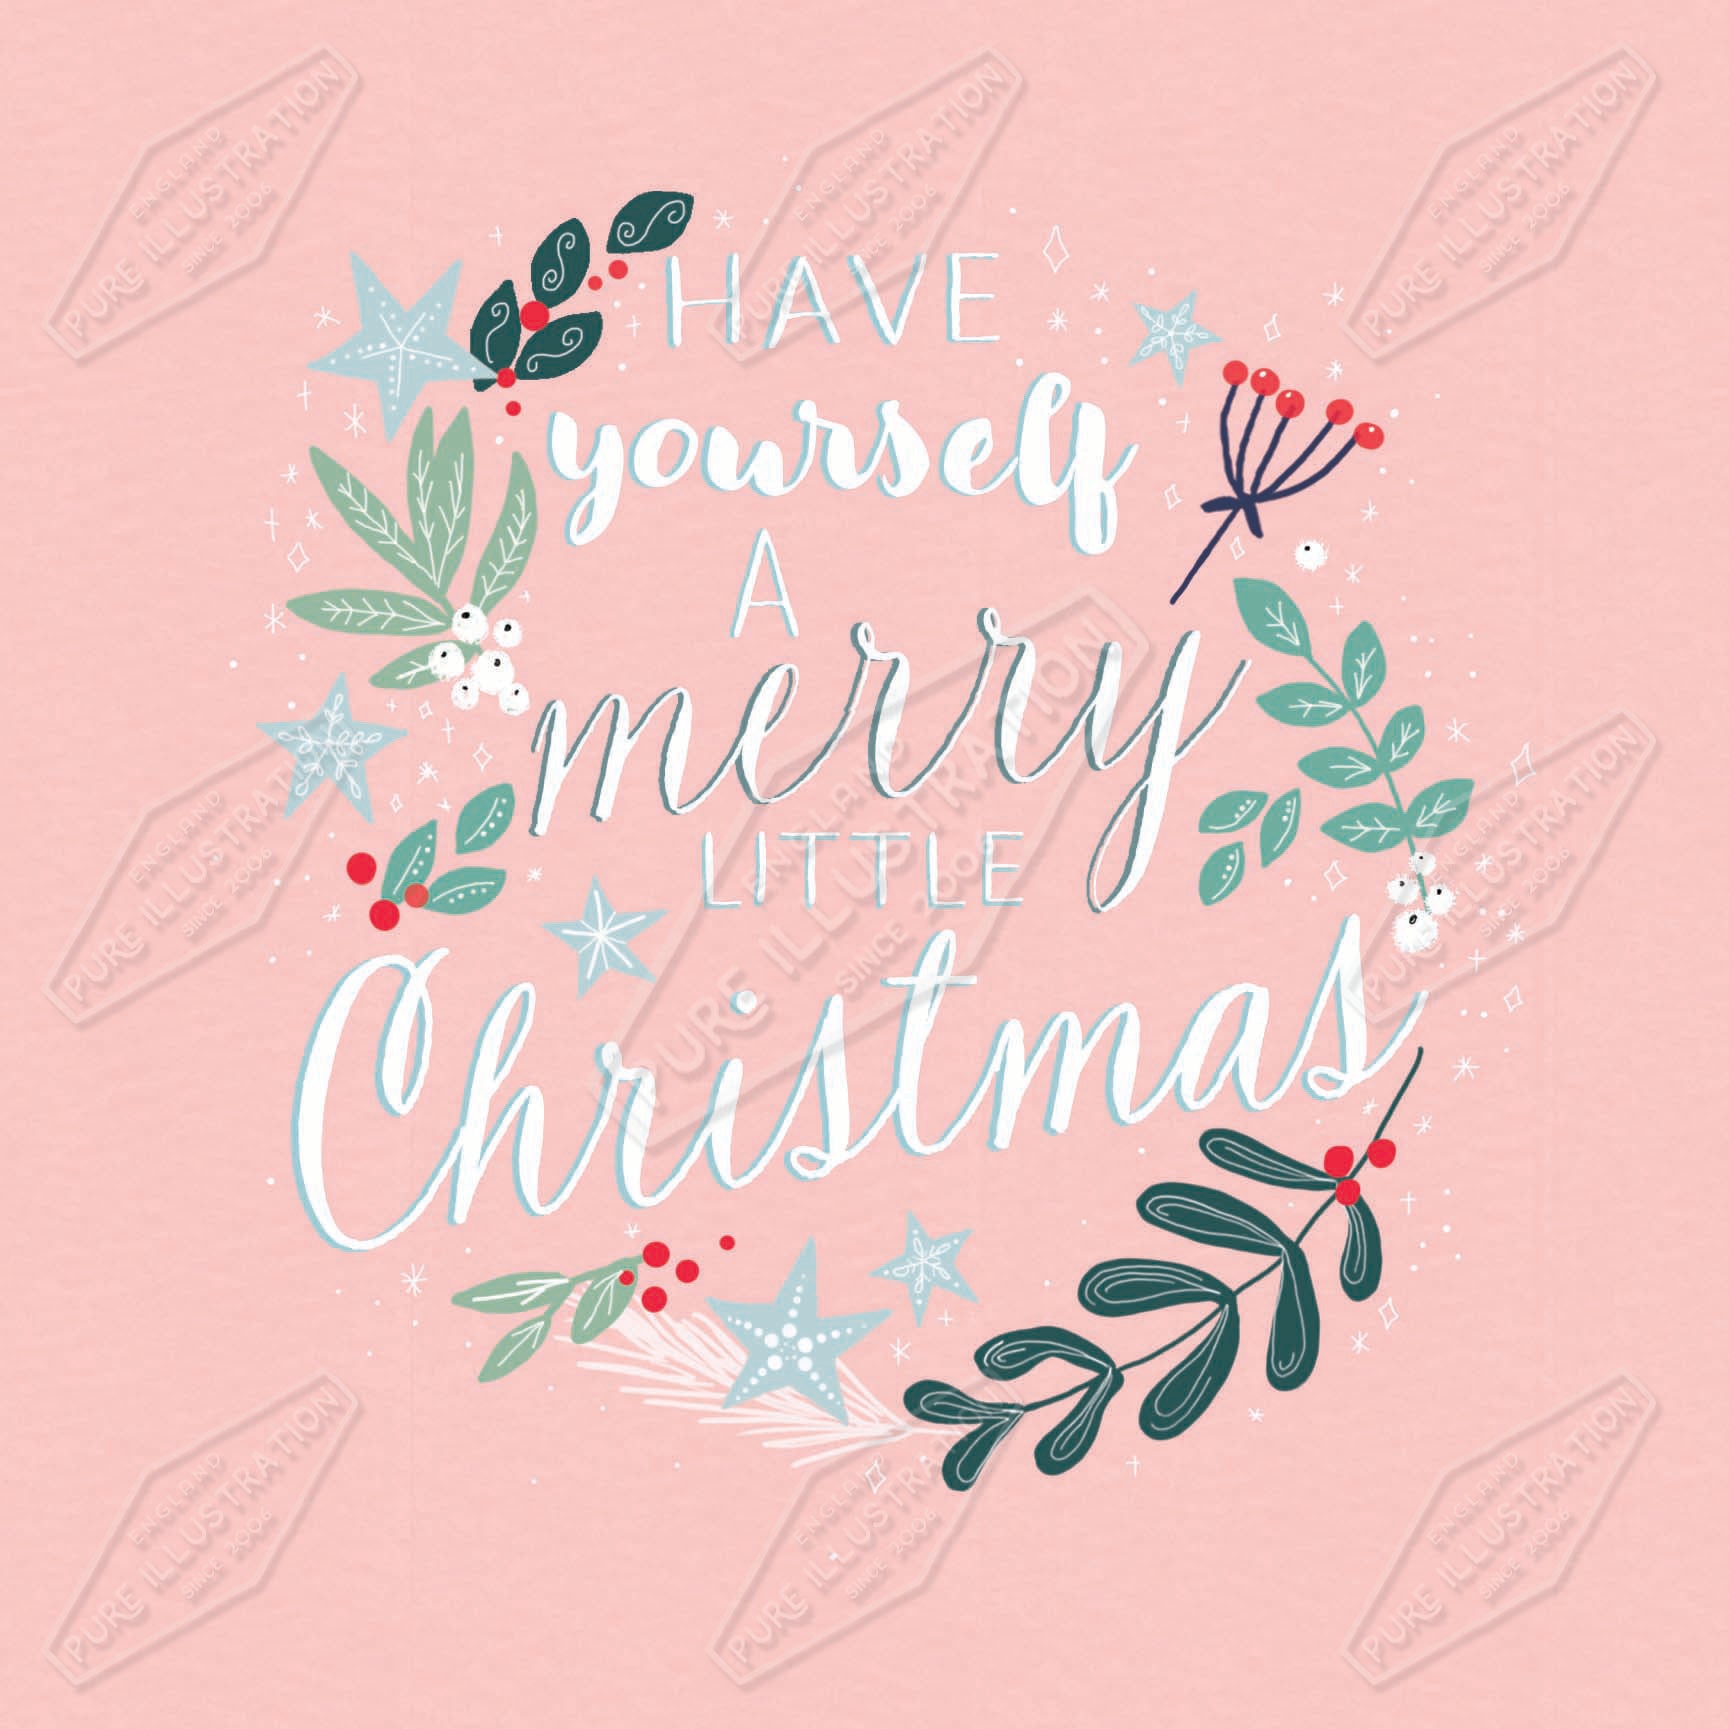 00035408SLA- Sarah Lake is represented by Pure Art Licensing Agency - Christmas Greeting Card Design